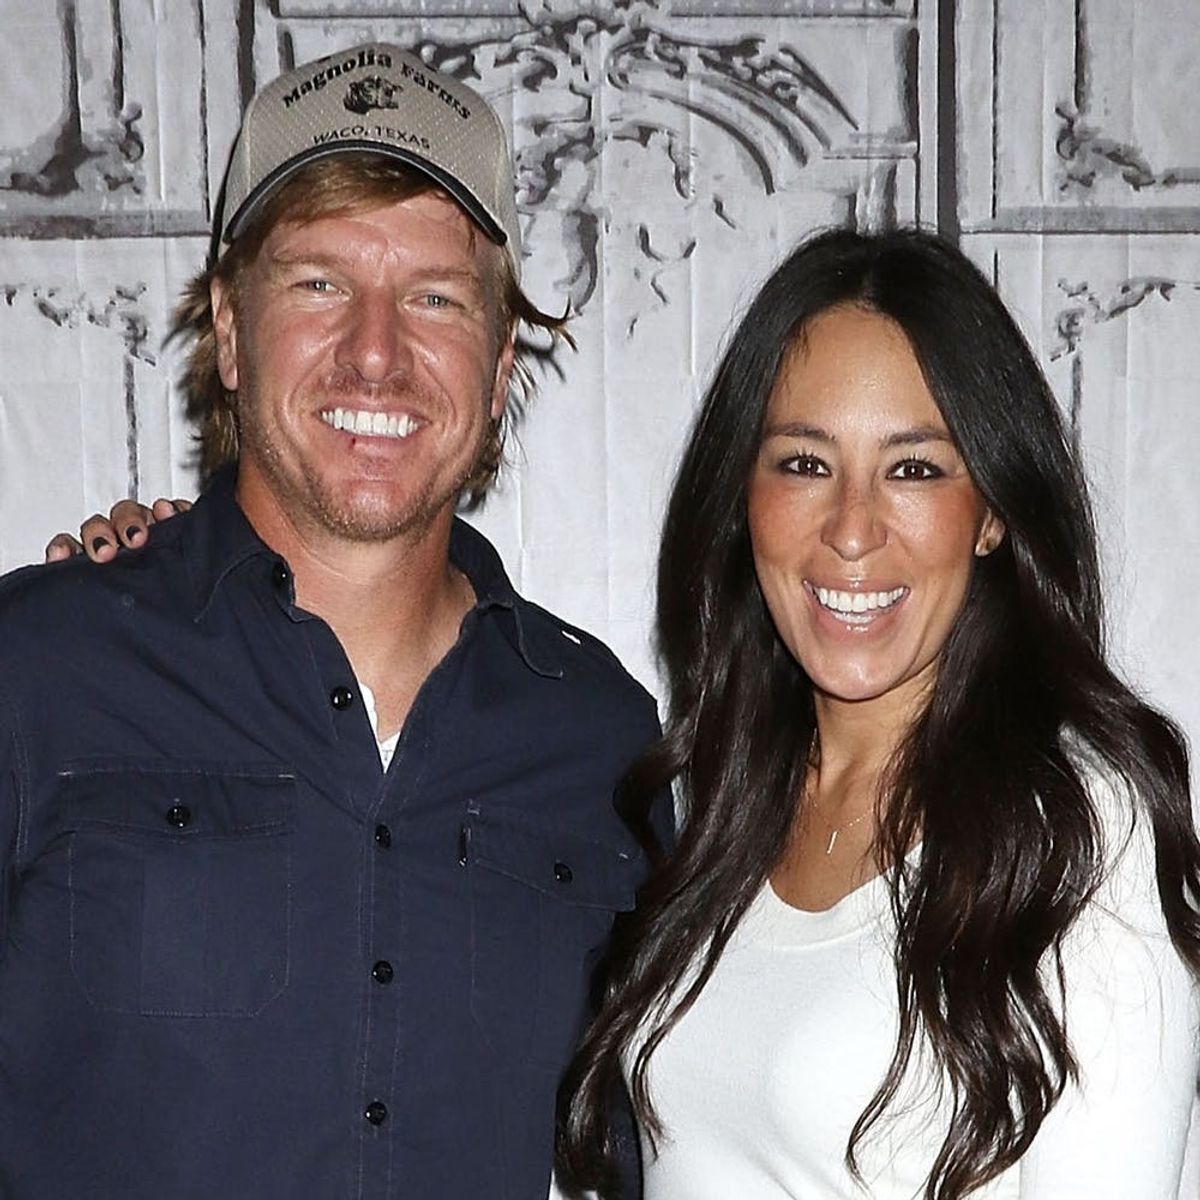 Chip and Joanna Gaines Say “Fixer Upper” Will End After Season 5